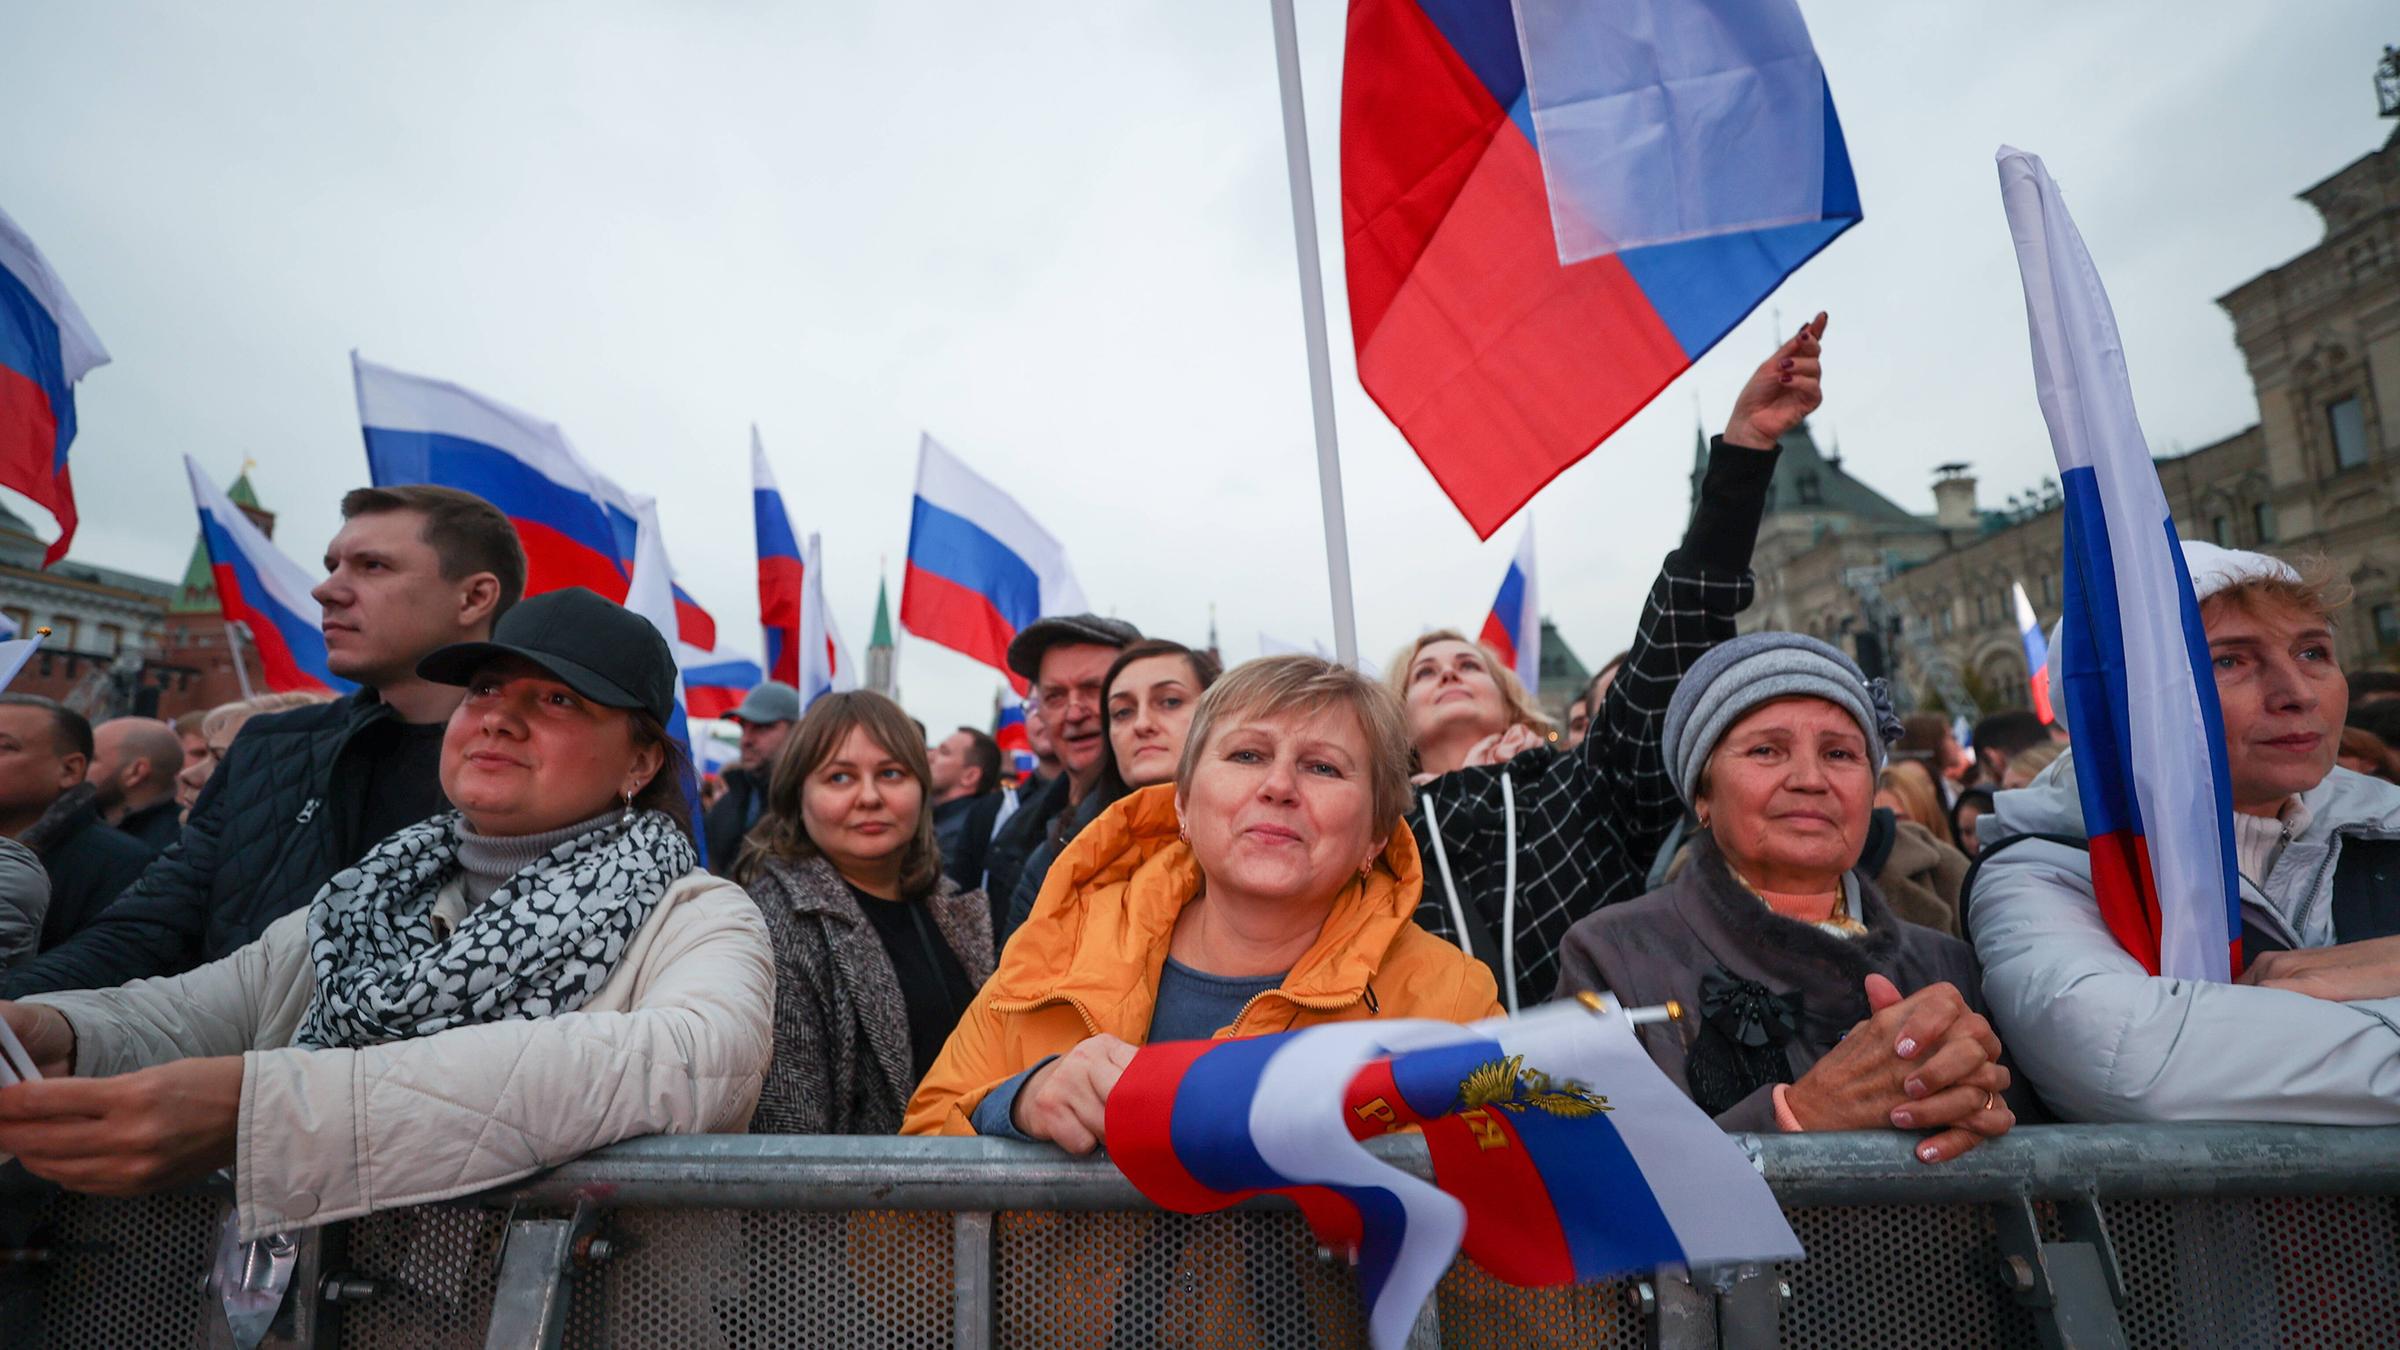 Moscow: People celebrate annexations in Red Square